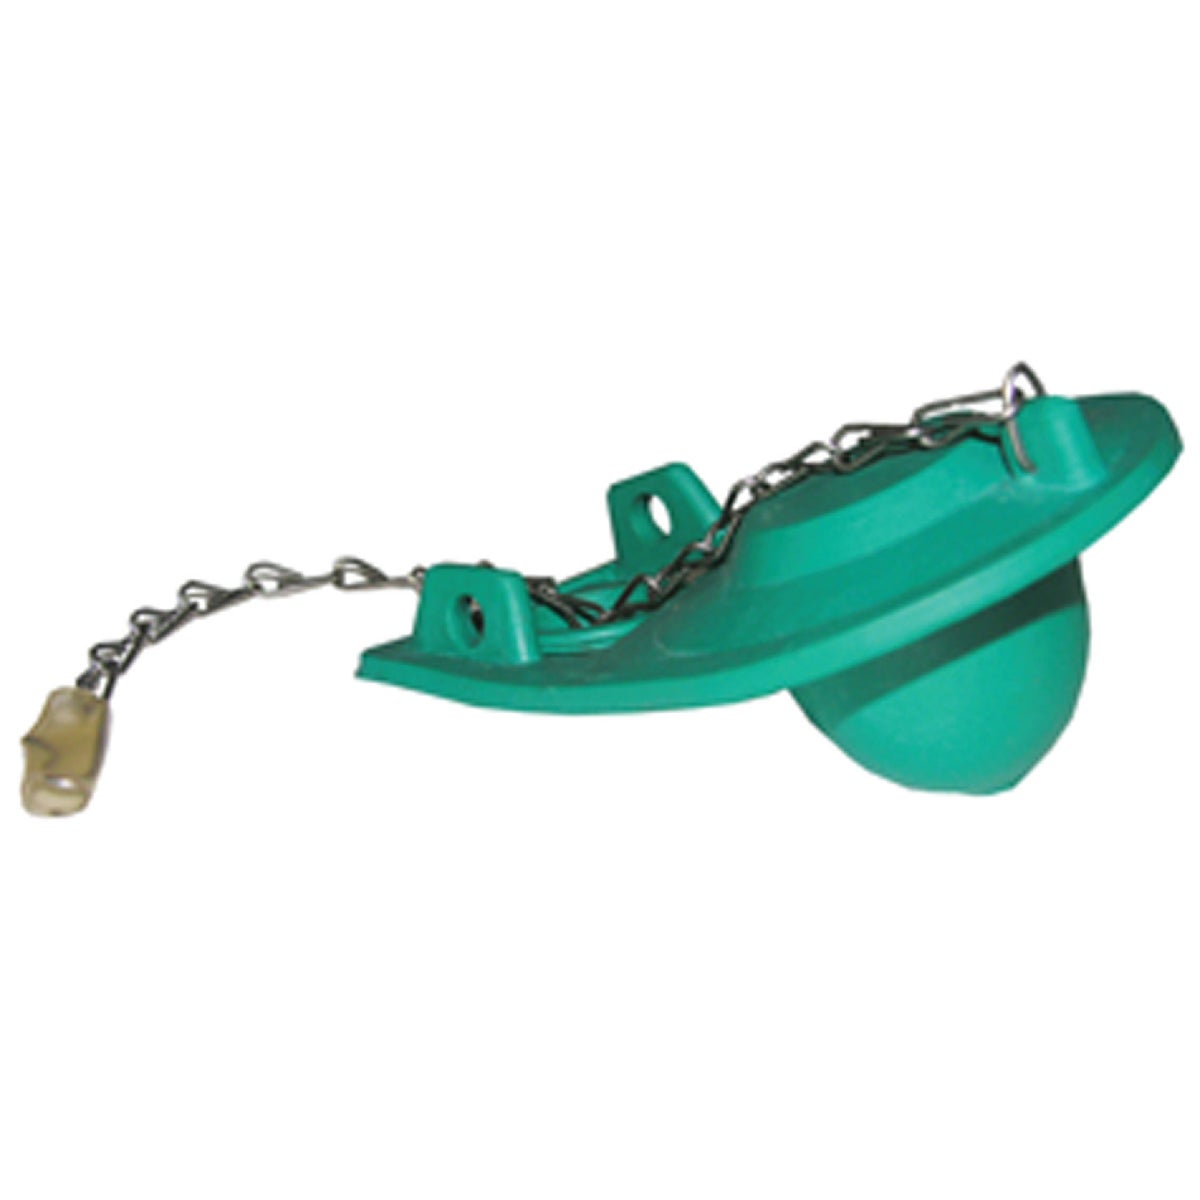 Lasco Duraflap Magnus Green 3-In-1 Toilet Flapper with Chain